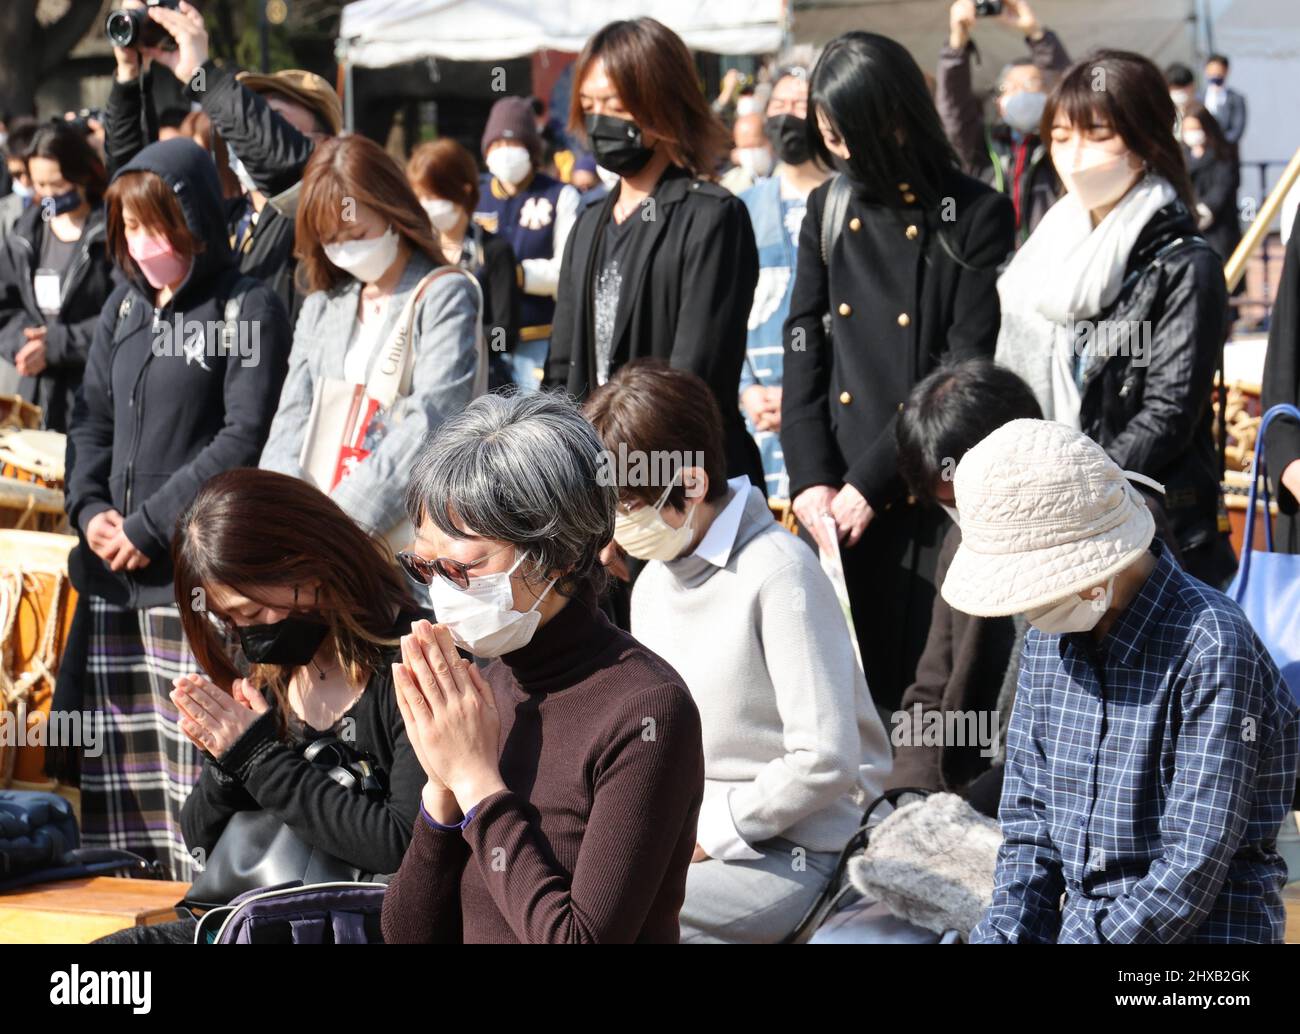 Tokyo, Japan. 11th Mar, 2022. People pray in silence for the victims of 3.11 massive earthquake and tsunami in Tokyo on Friday, March 11, 2022. Japan marked the 11th anniversary day of the East Japan Great Earthquake which killed some 20,000 in 2011. Credit: Yoshio Tsunoda/AFLO/Alamy Live News Stock Photo